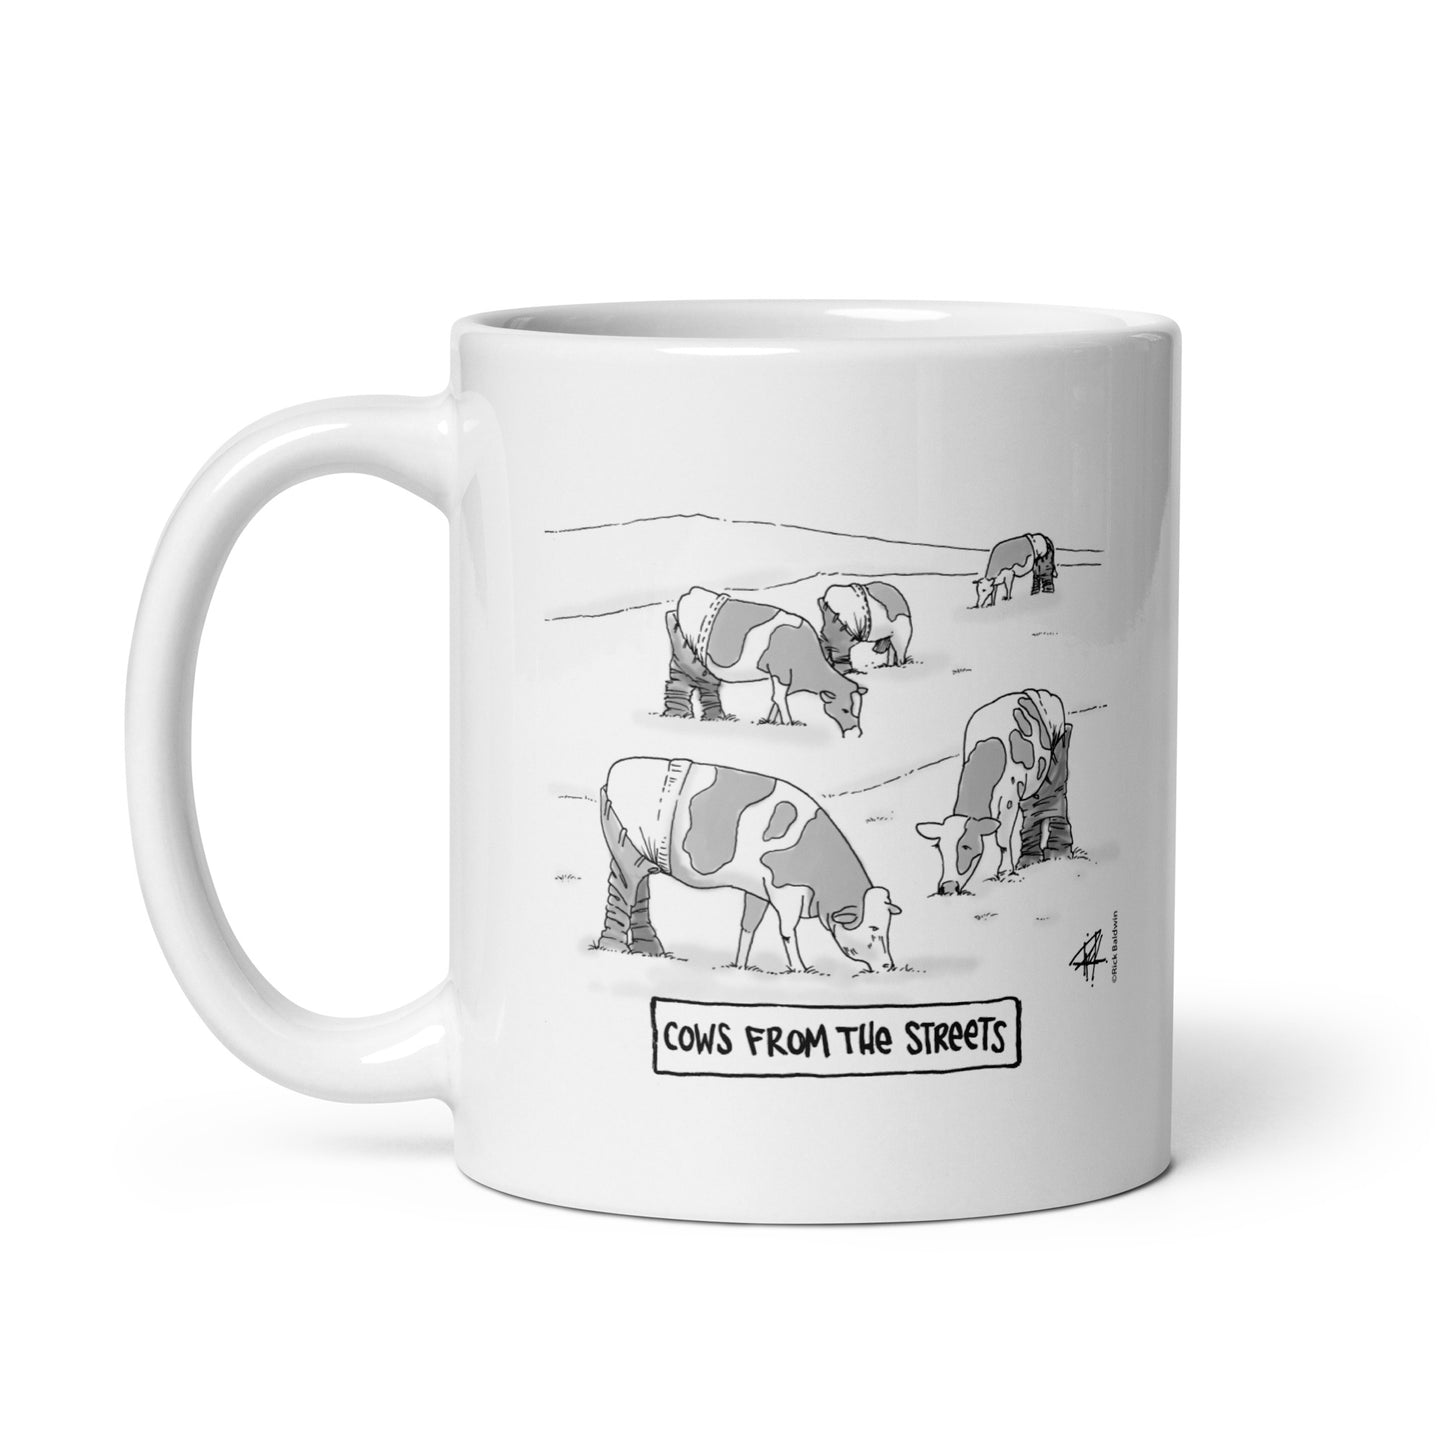 Cows From The Street - White Glossy Mug by RICK BALDWIN